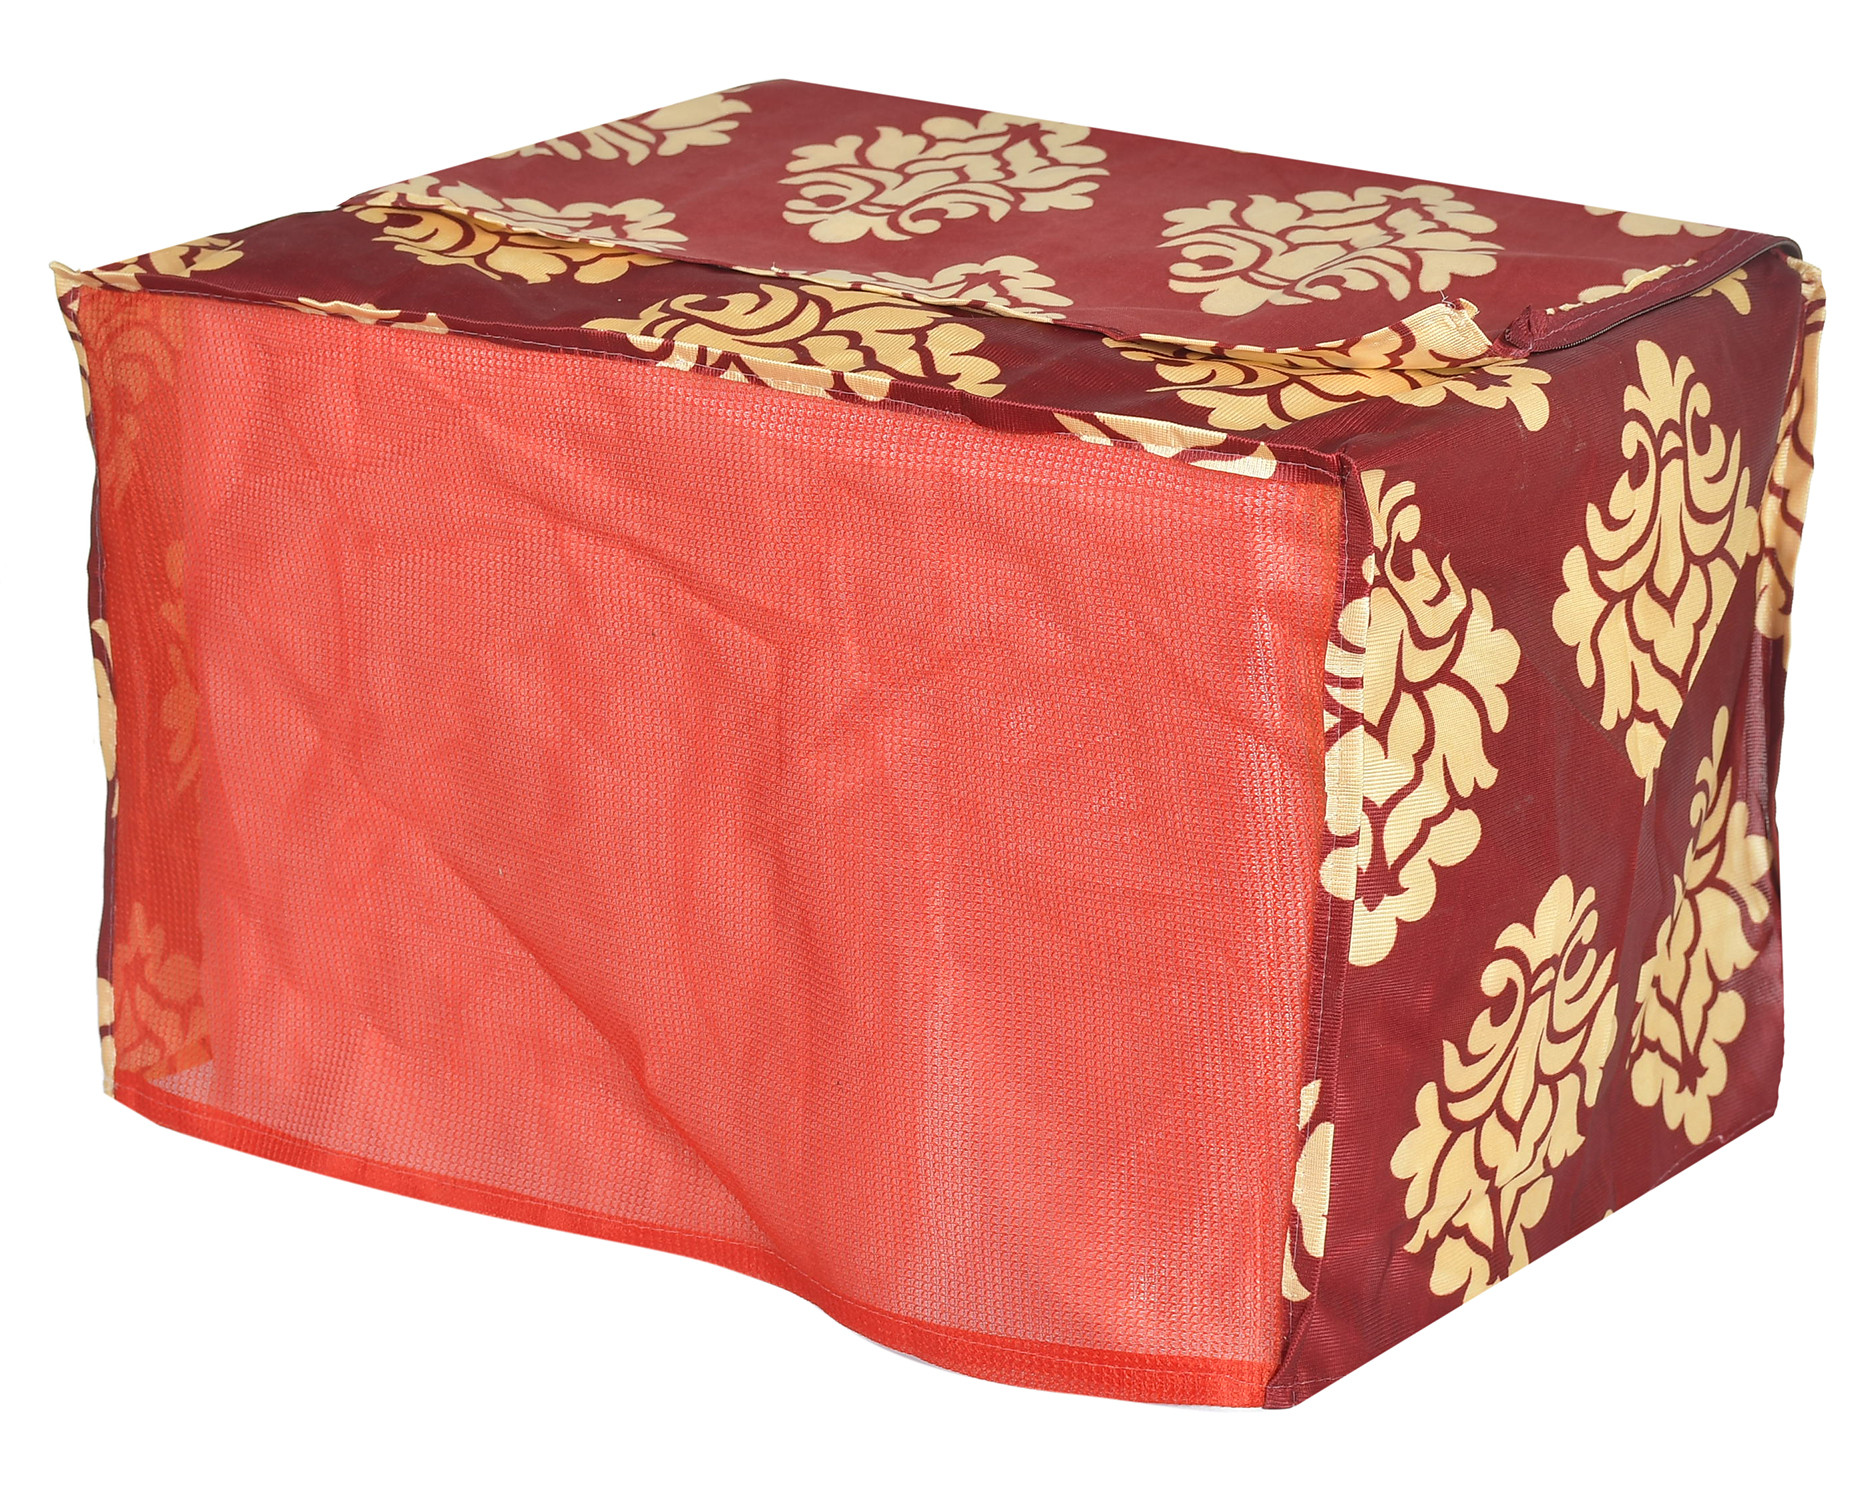 Kuber Industries Polyster Floral Printed Microwave Oven Cover,30 Ltr. (Maroon)-HS43KUBMART25943